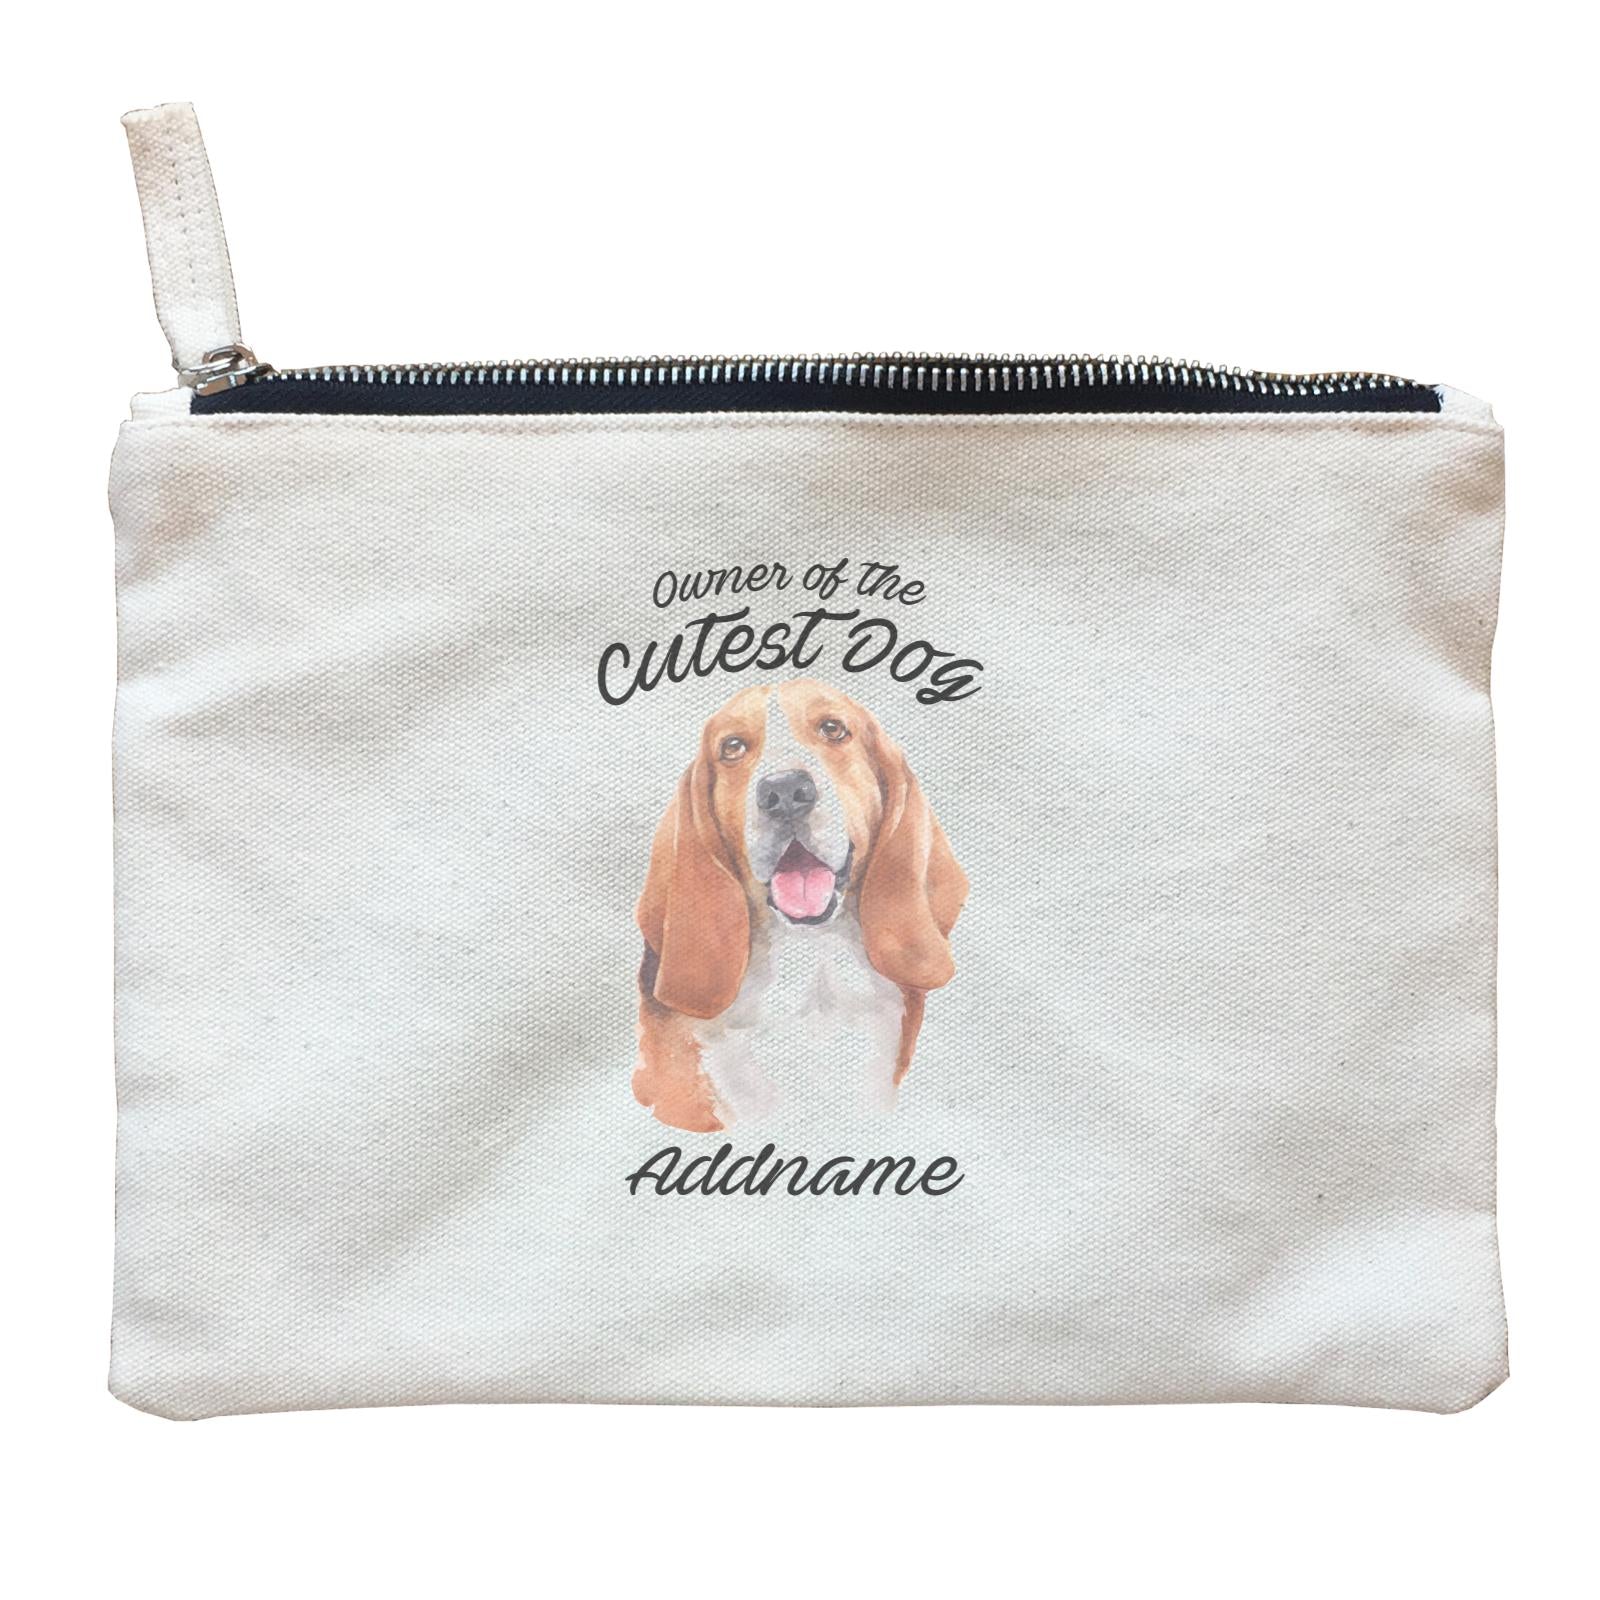 Watercolor Dog Owner Of The Cutest Dog Basset Hound Addname Zipper Pouch